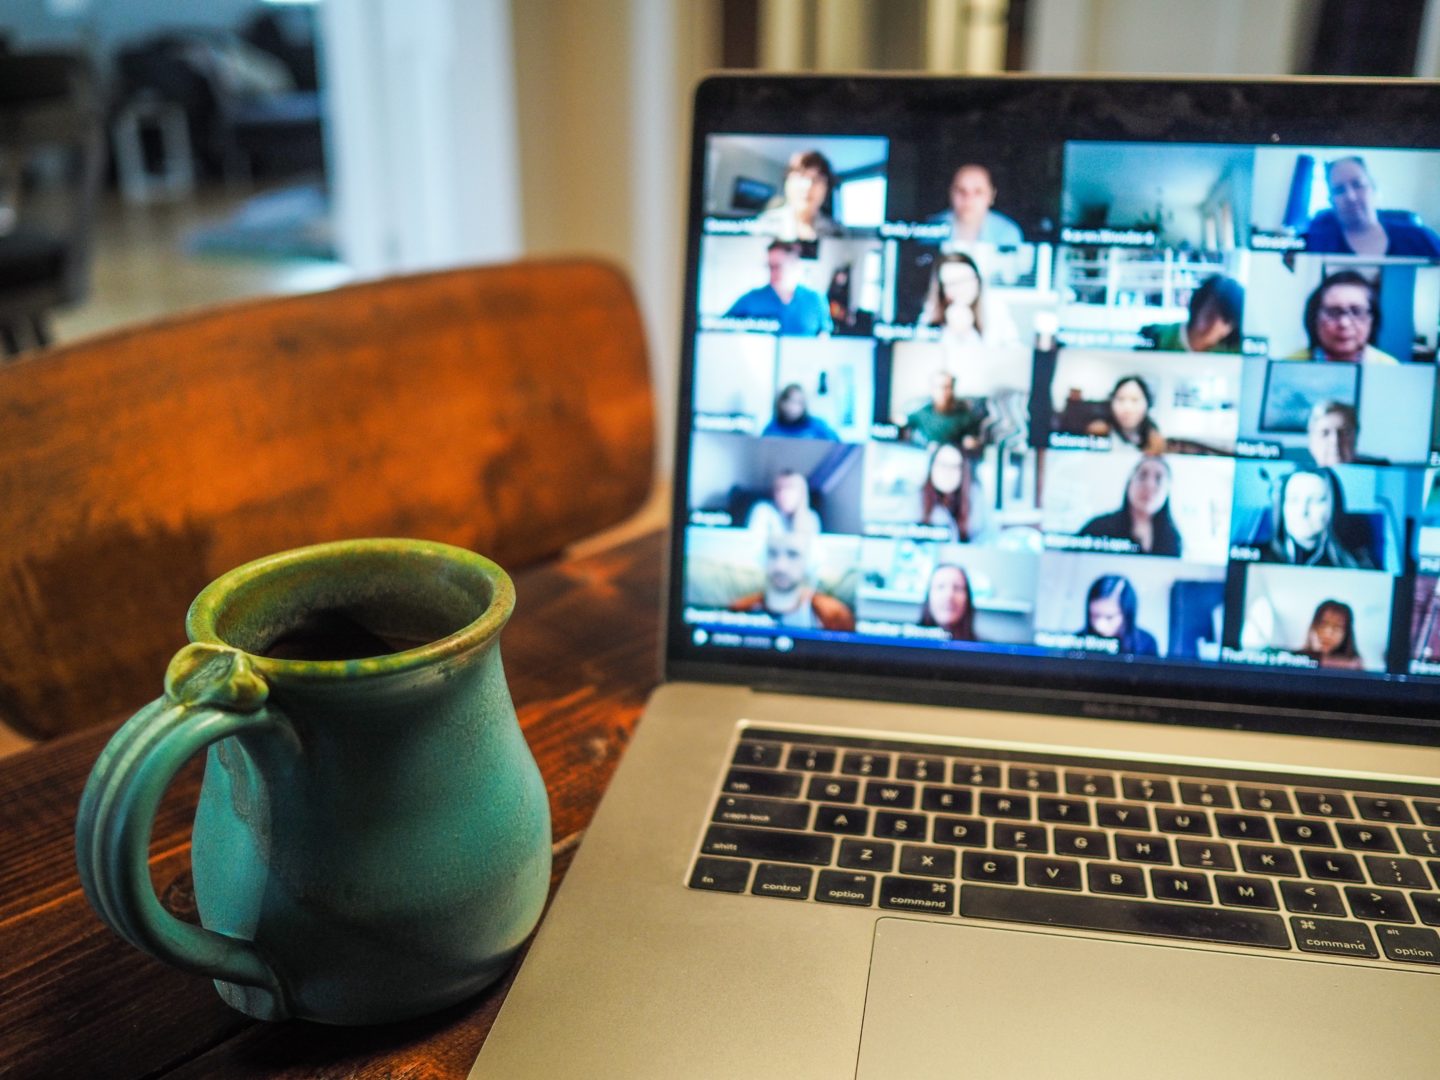 Home office set up showing a video call underway with a cup of coffee next to it